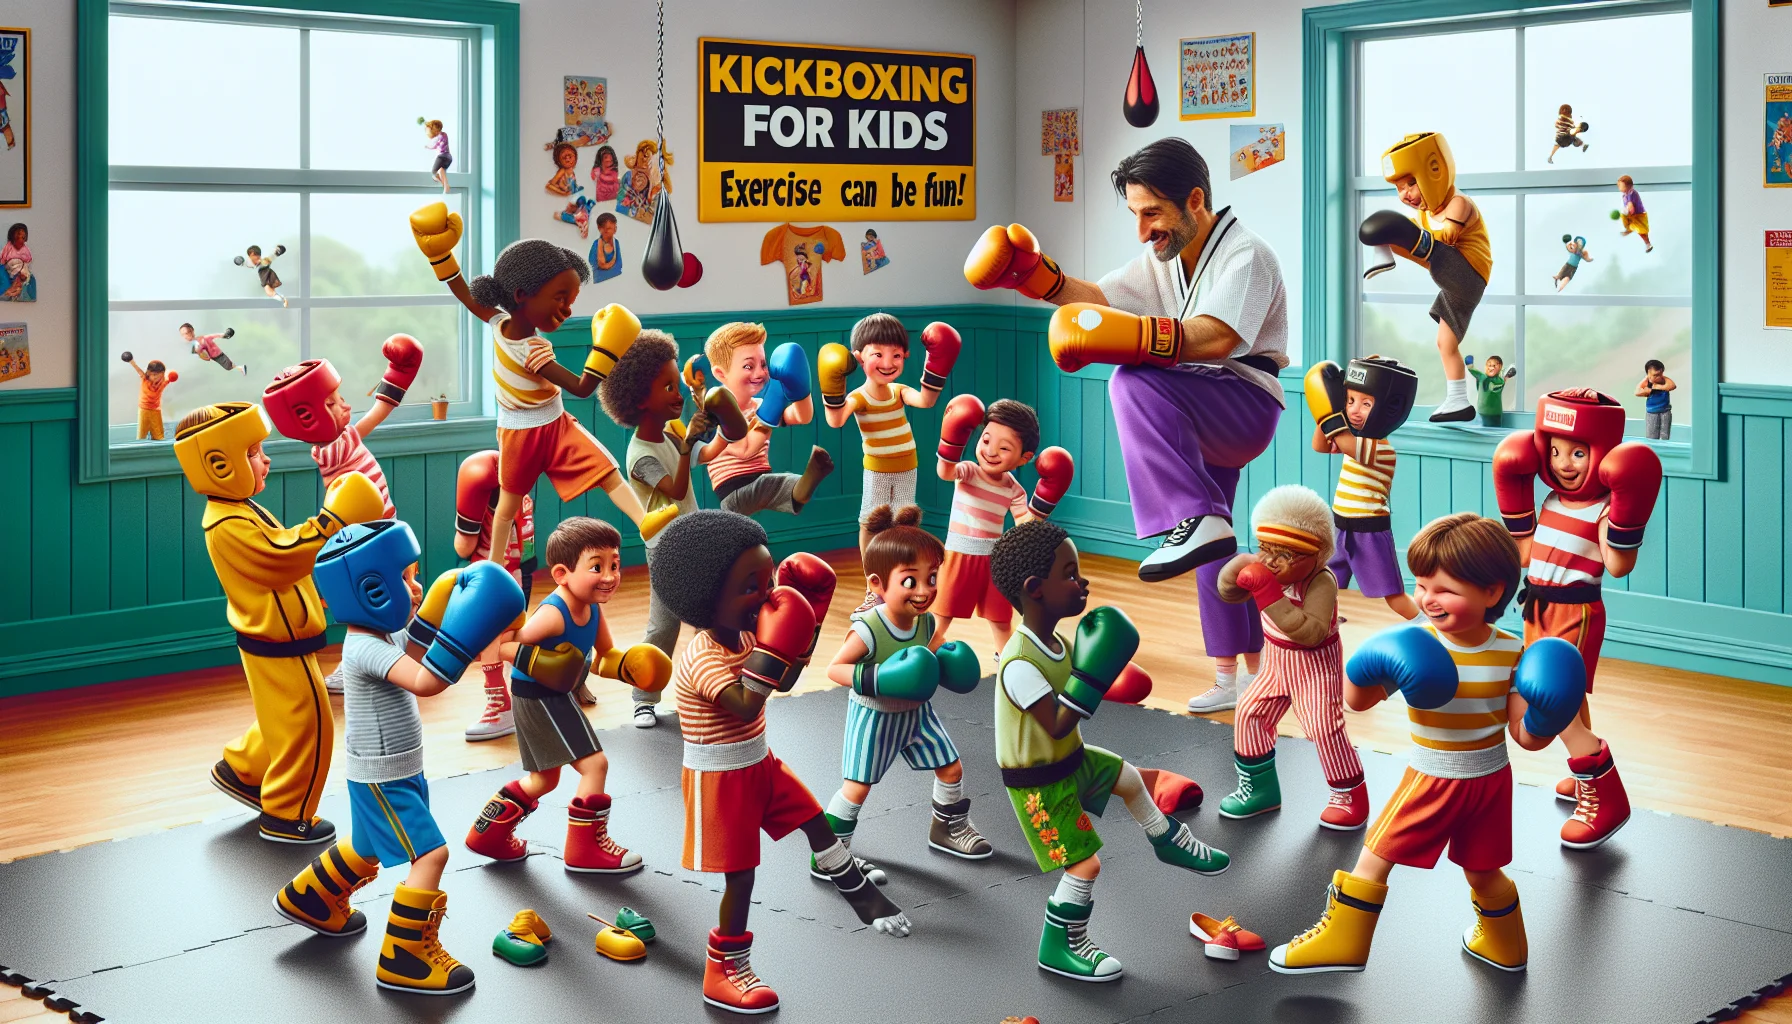 Create an amusing and realistic scene of a children's kickboxing class. Picture a mixed-gender gaggle of children of diverse descents including Caucasian, Black, South Asian, Hispanic, and Middle-Eastern. All are wearing oversized boxing gloves and colorful safety gear, attempting to mimic a kickboxing instructor's high-flying roundhouse kick. A few kids are clumsily toppled over, adding to the humor. A boldly lettered sign states 'Kickboxing for Kids: Exercise Can be Fun!'. The room is filled with energetic enthusiasm, bringing the message that exercise can be fun and enjoyable for children.